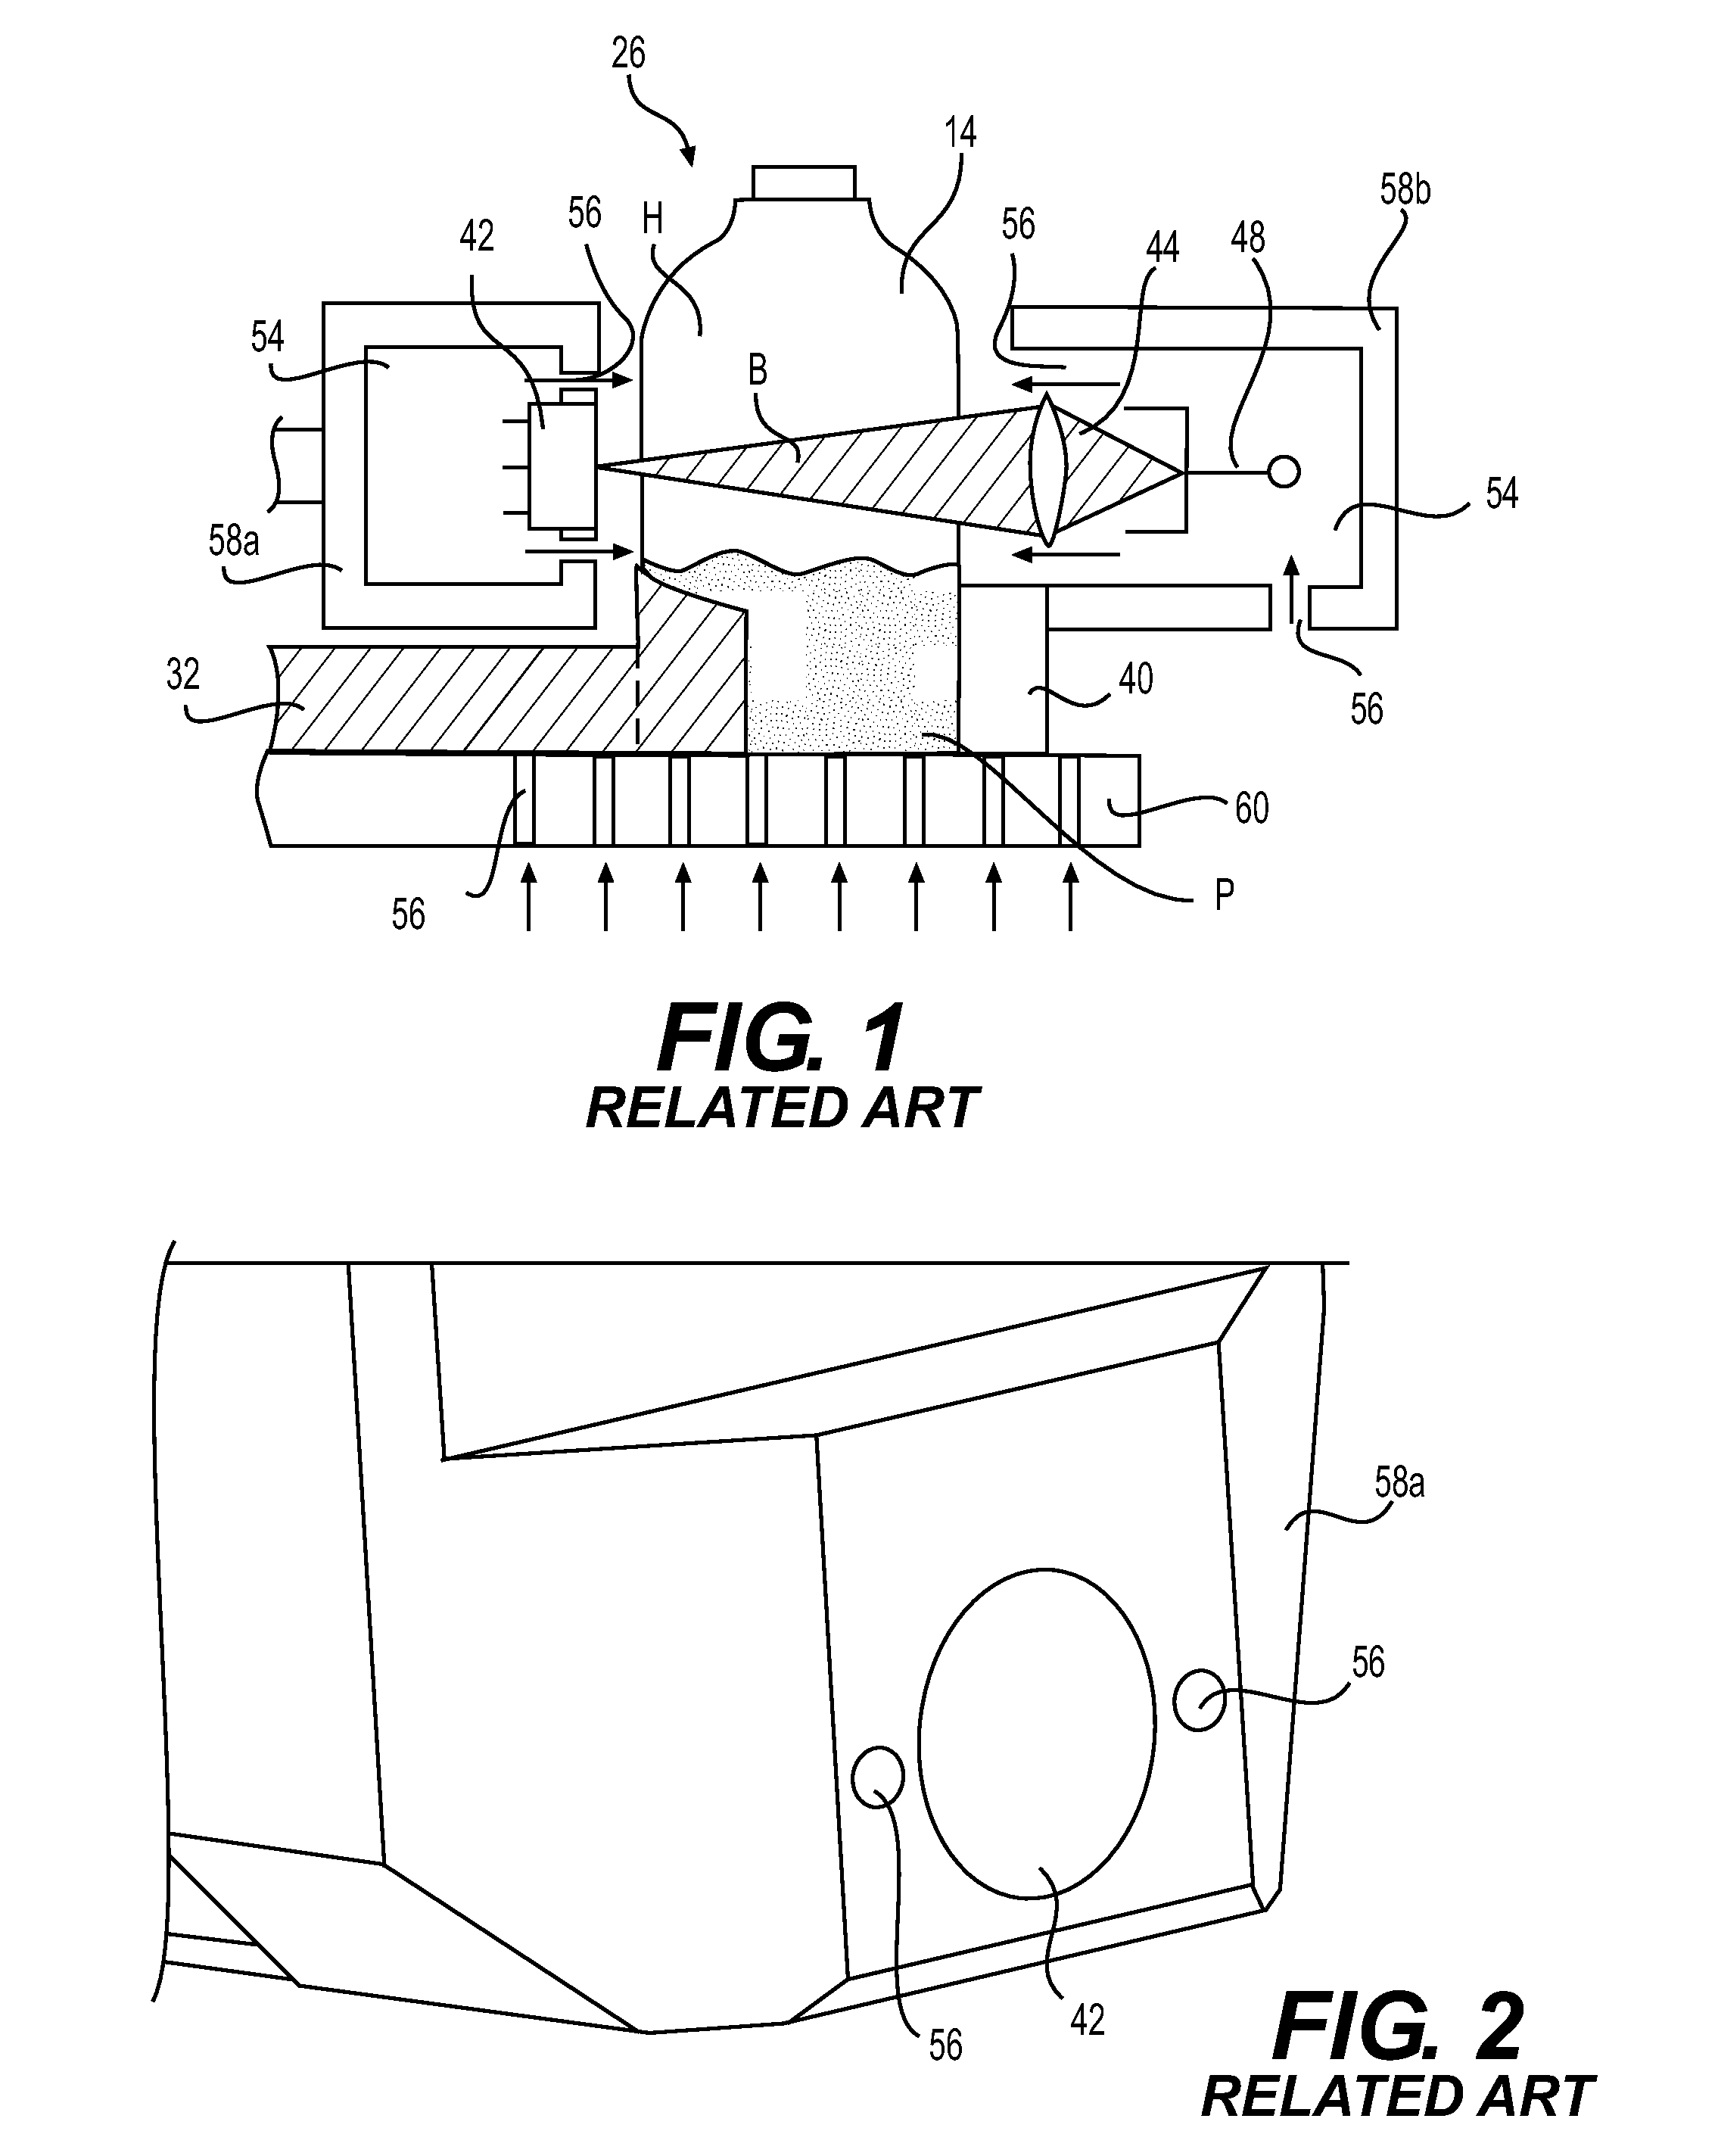 Method and apparatus for increased purge efficacy in optical absorption spectroscopic measurements of gases in sealed containers